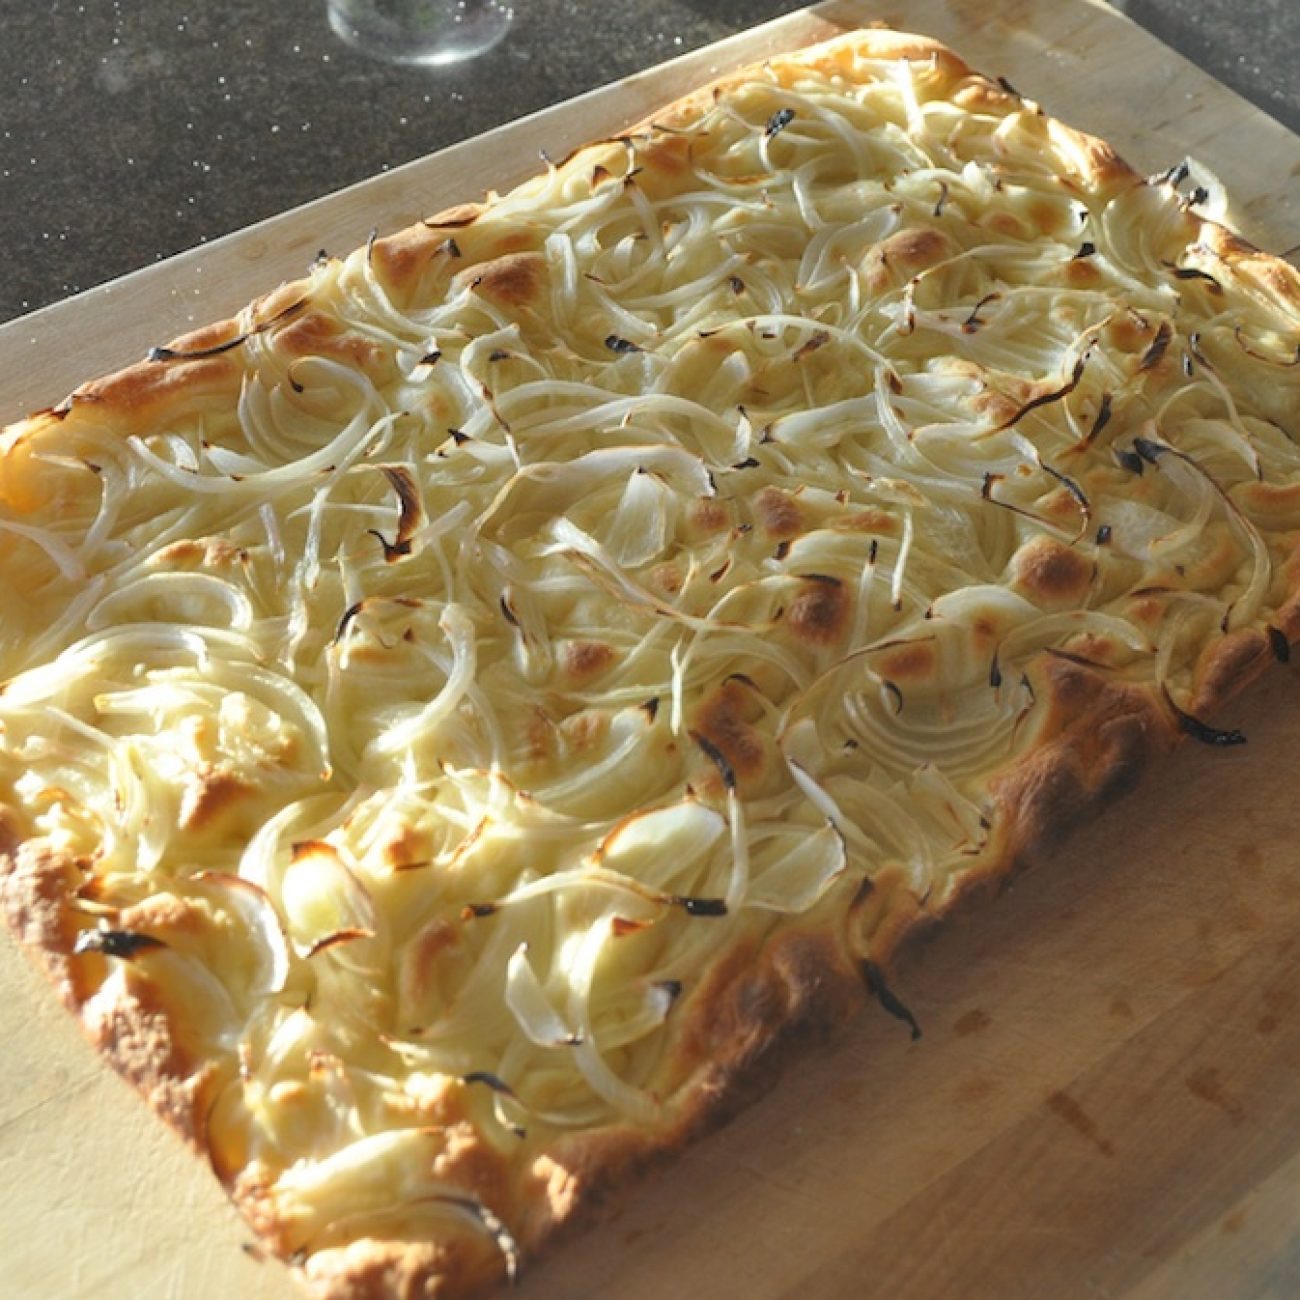 Recipe for Hand-kneaded Genoese focaccia